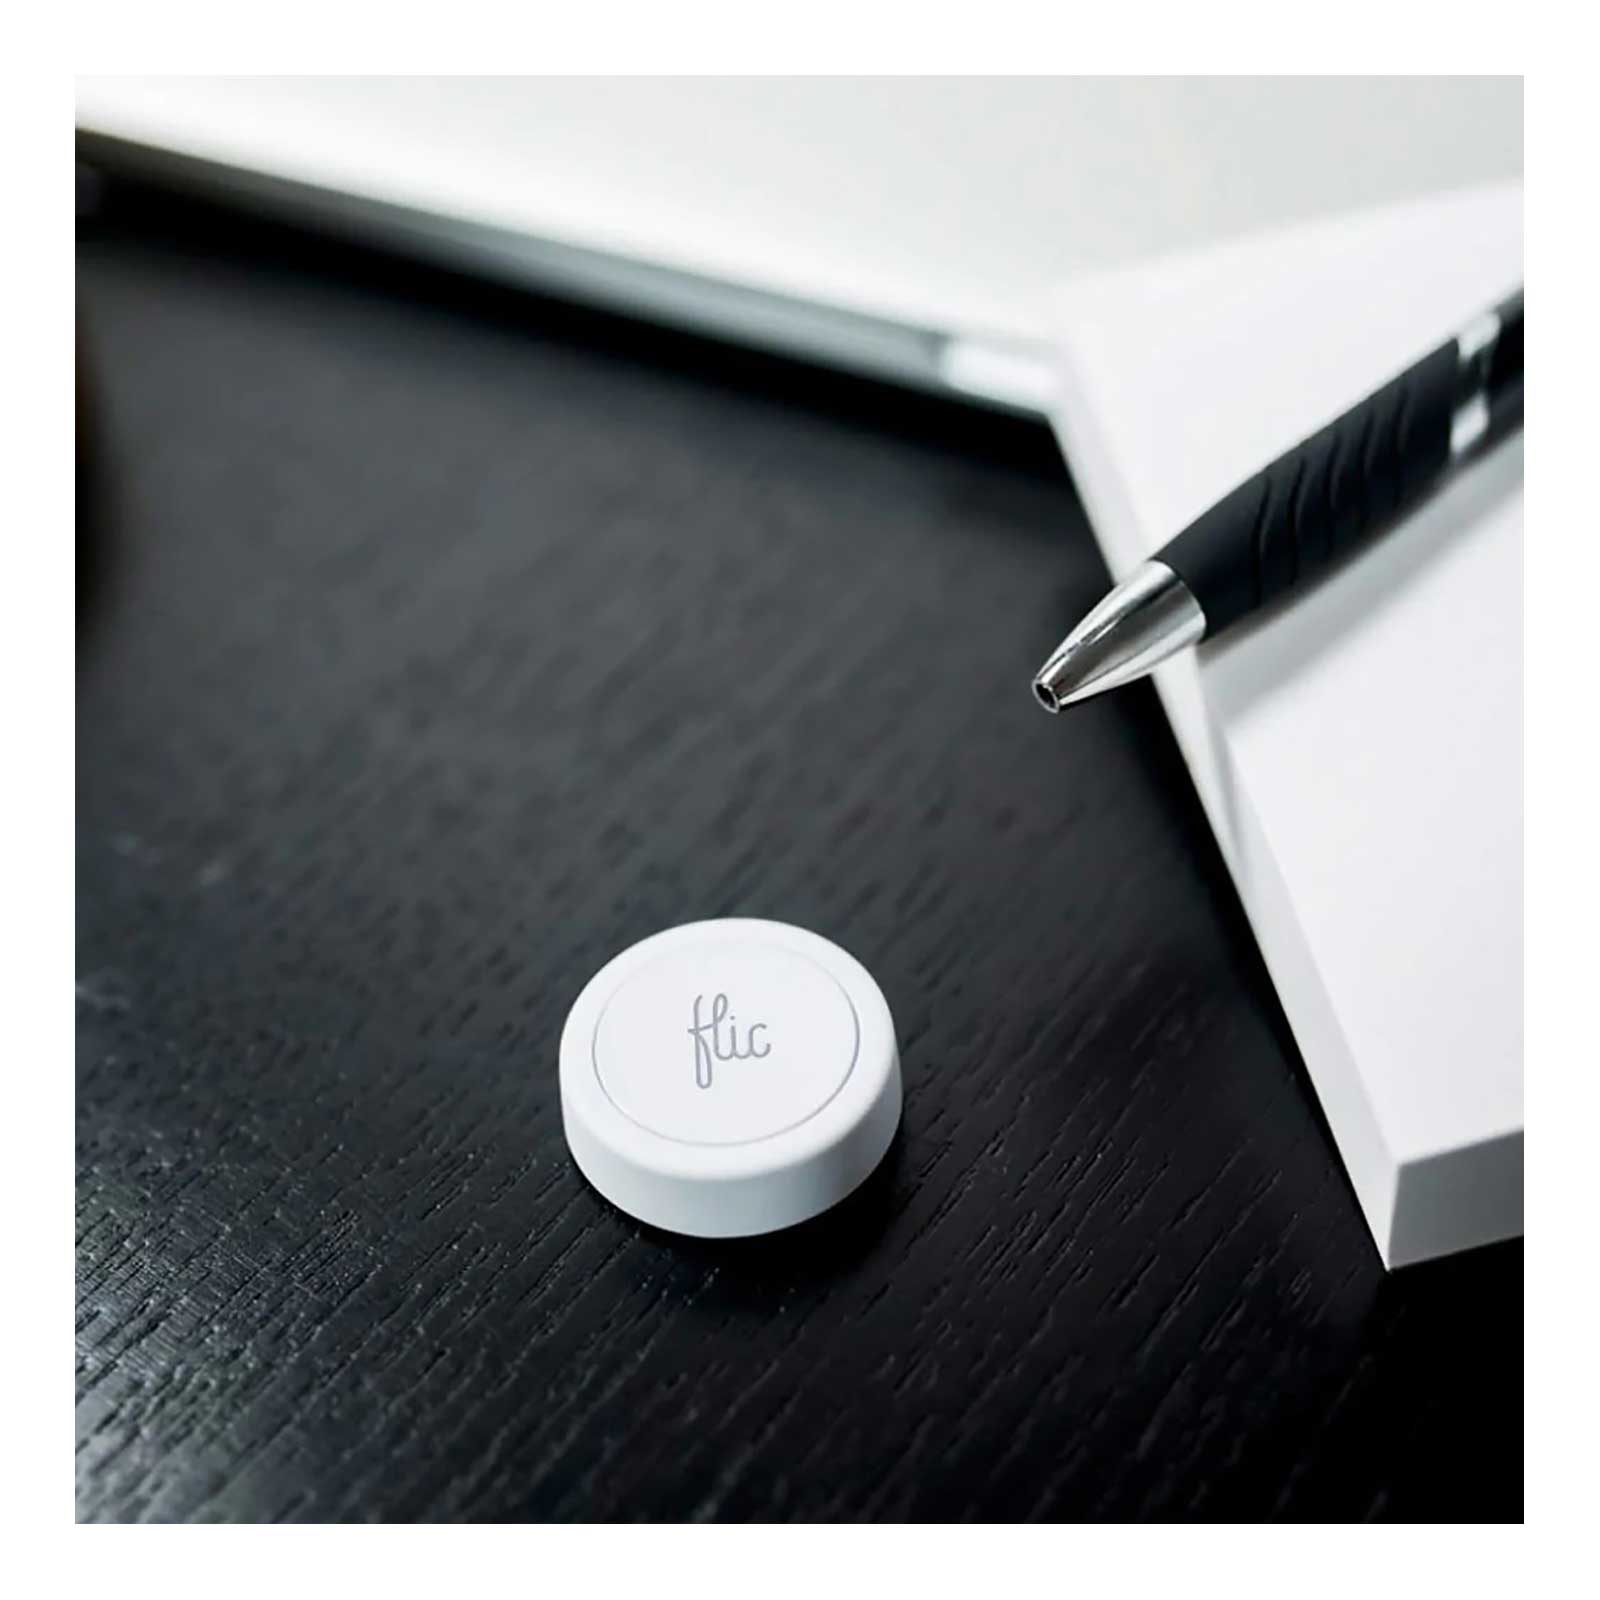 Flic 2 FW0021S Programmable Smart Home Button Double Pack